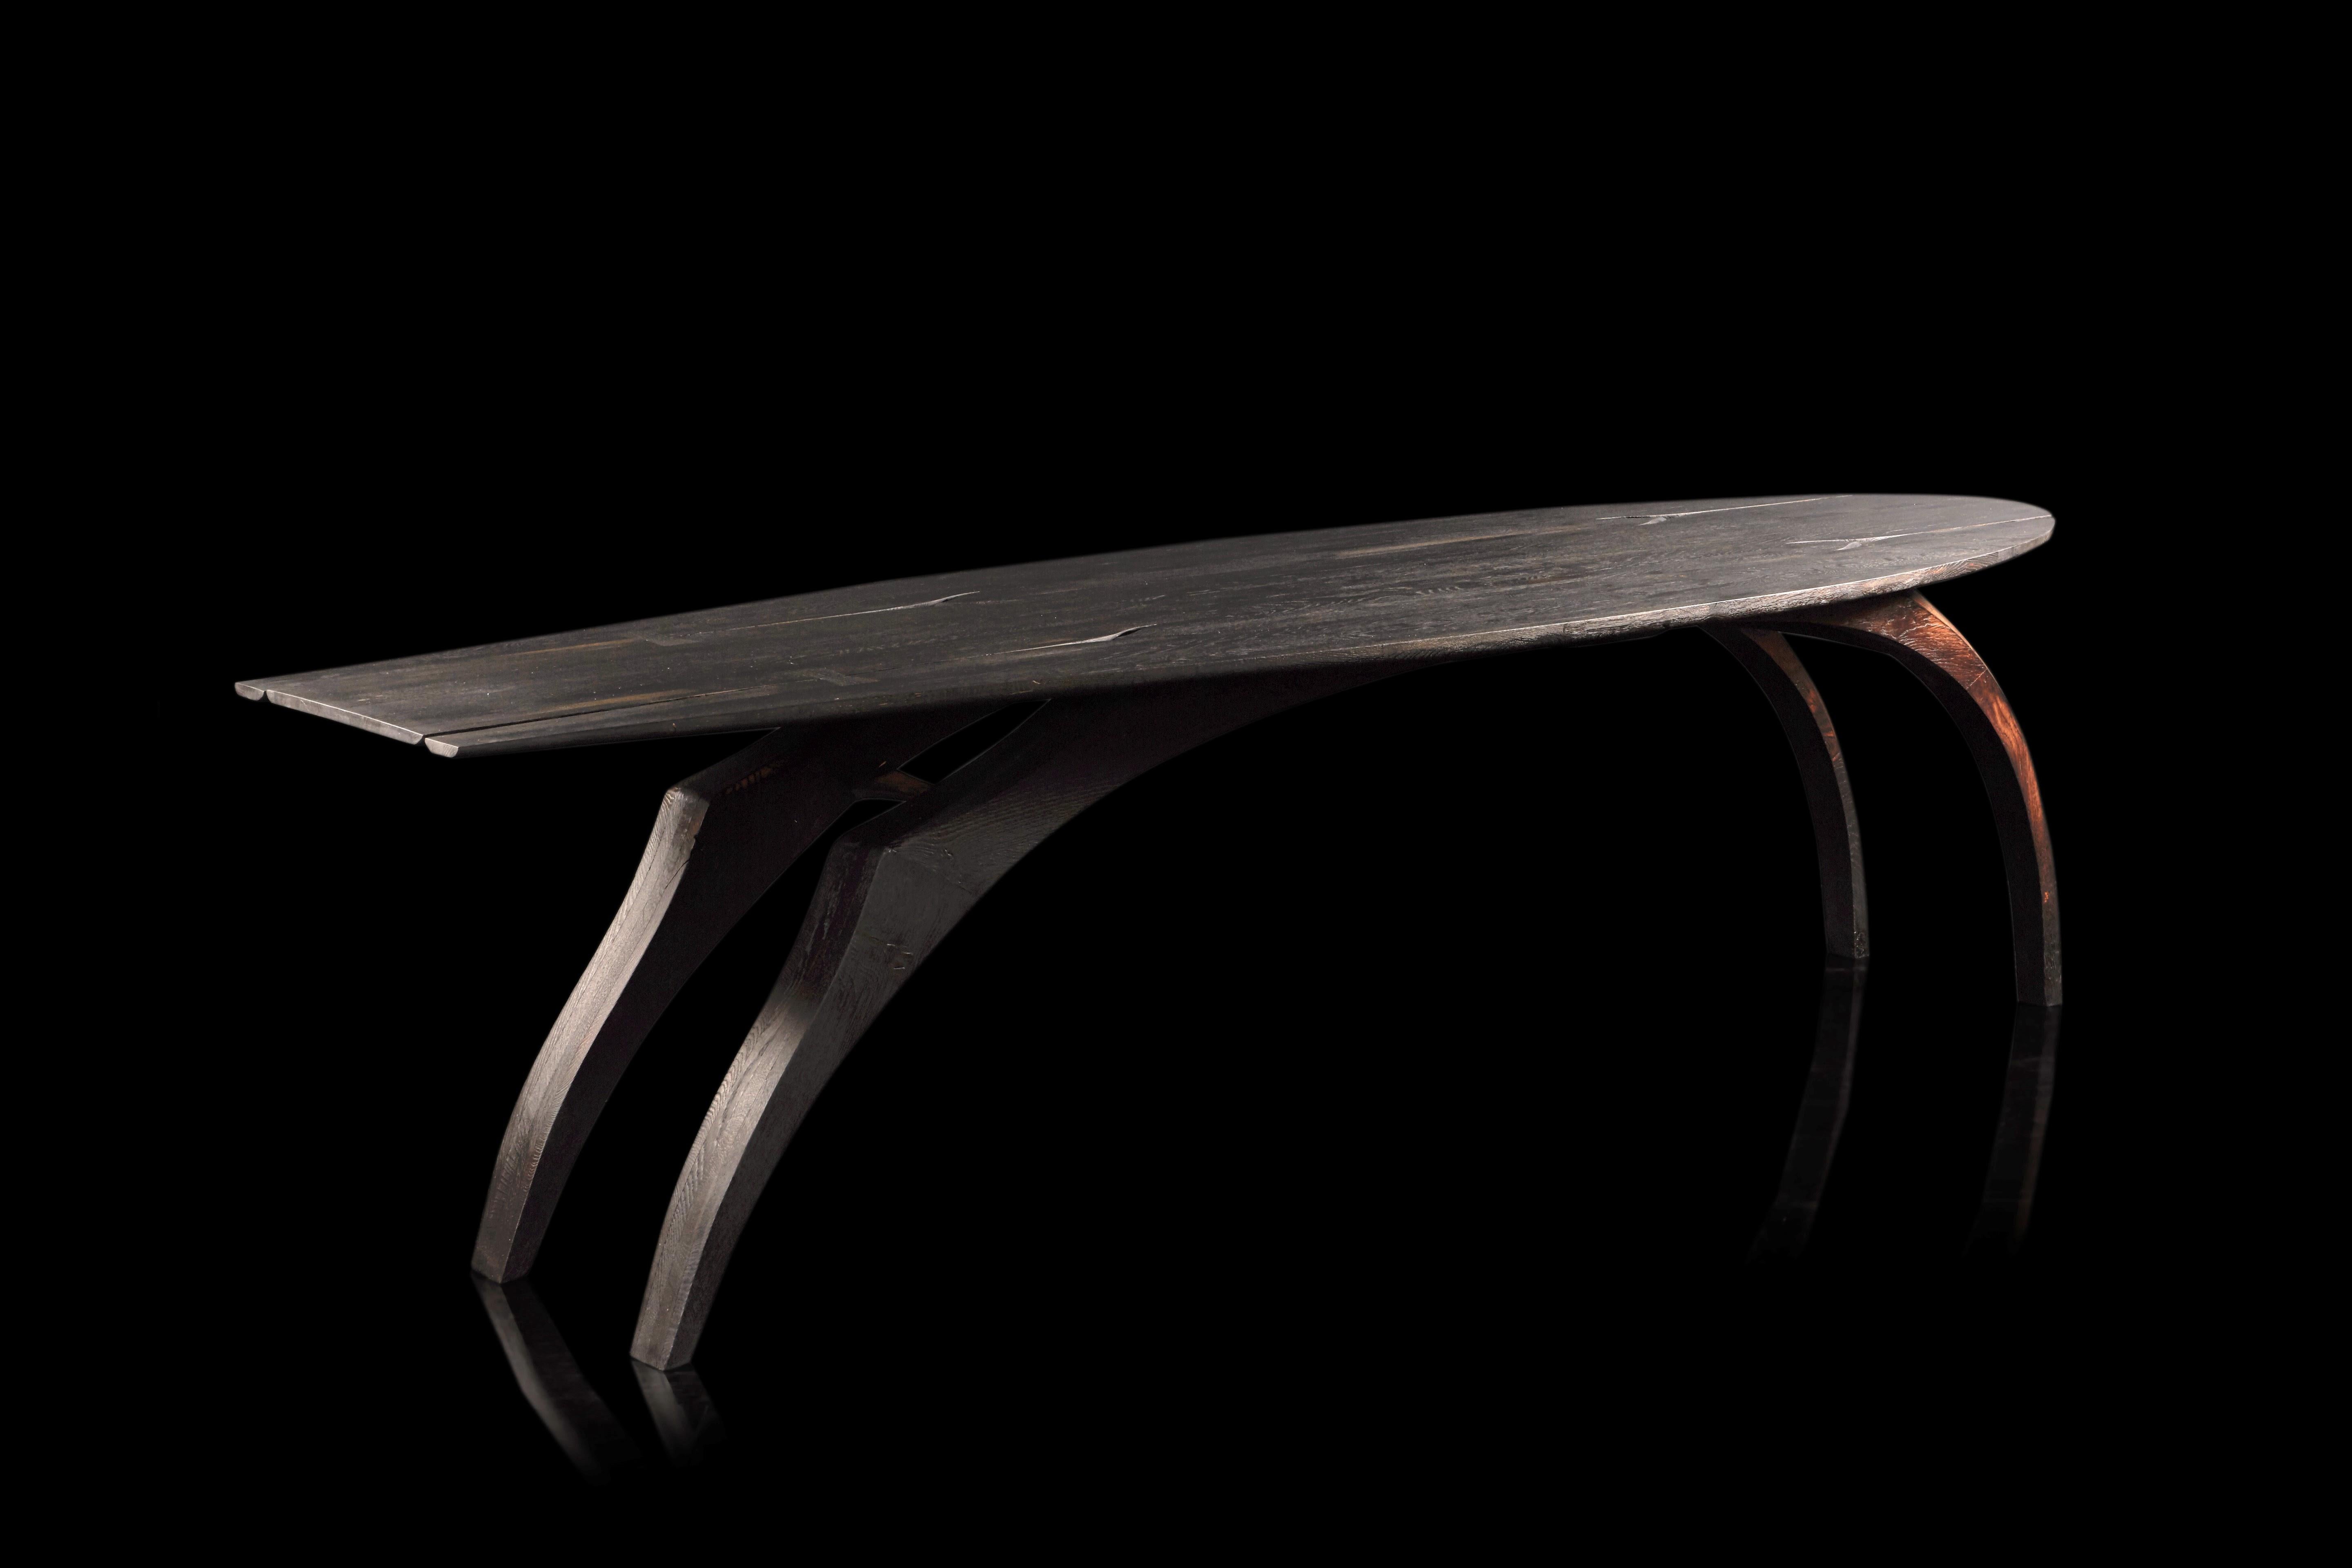 English 'Leap' Dining table, ebonized and scorched oak. One of a kind. Jonathan Field. 